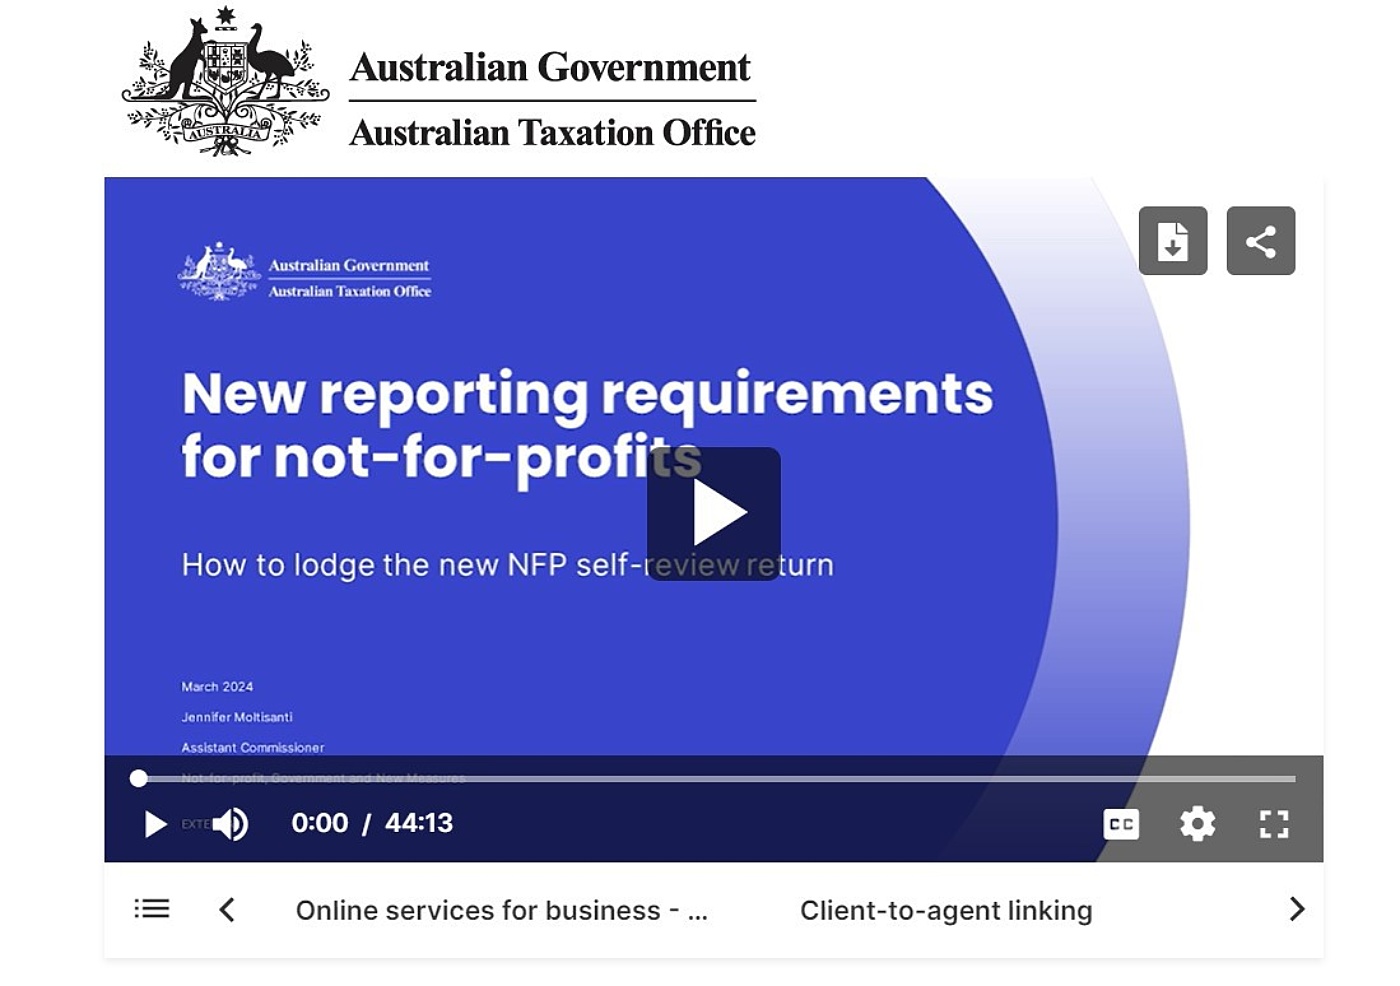 ATO webinar video on NFP tax changes